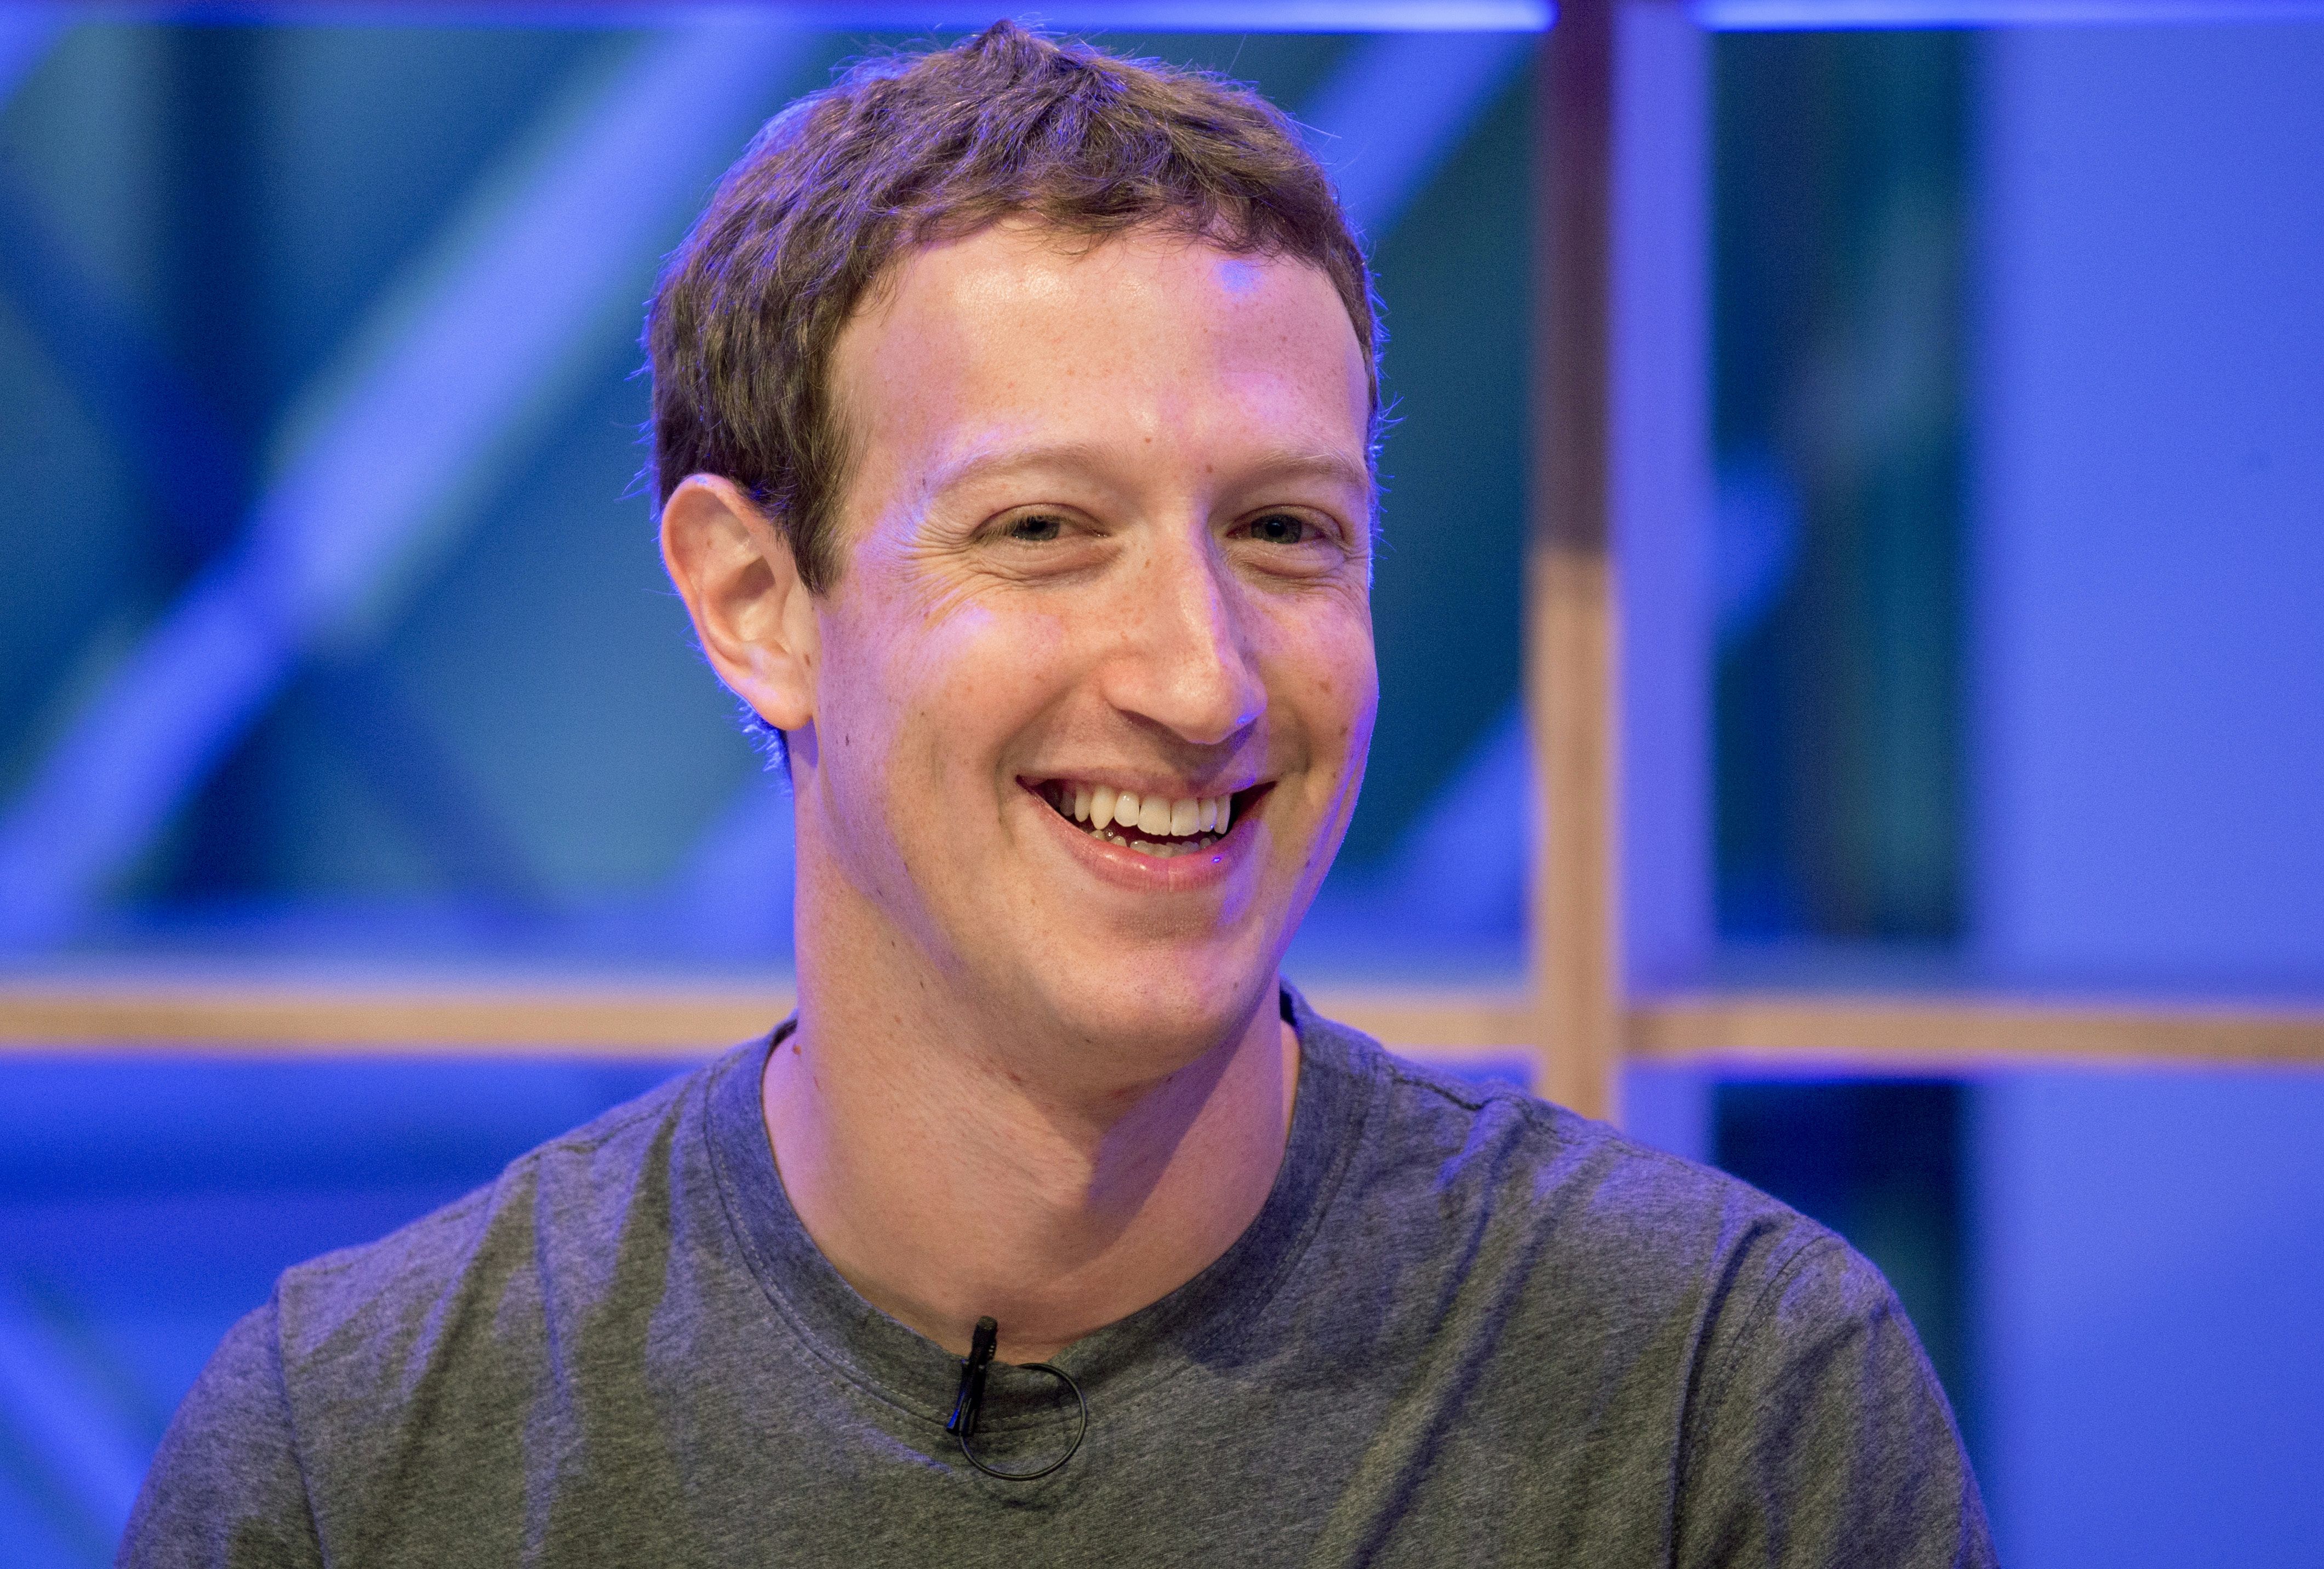 Mark Zuckerberg is one of the most famous names in the world when it comes to tech and the world of Facebook. Learn about his education, net worth, and age here.